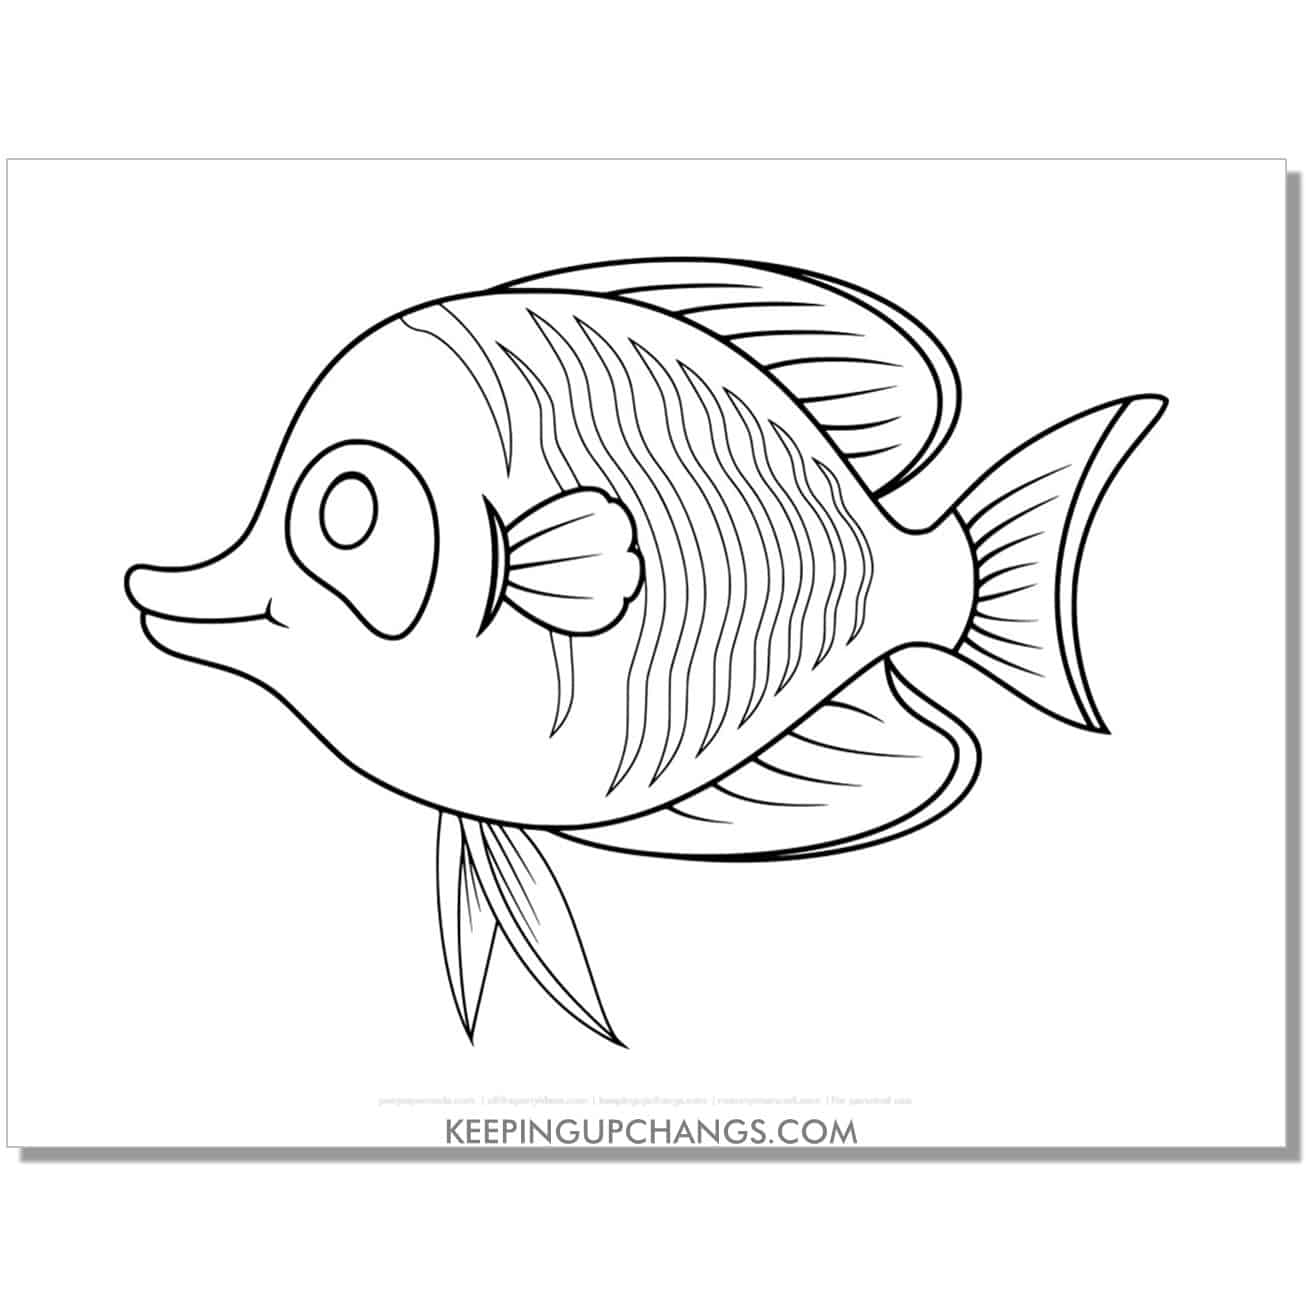 free striped fish coloring page, sheet.